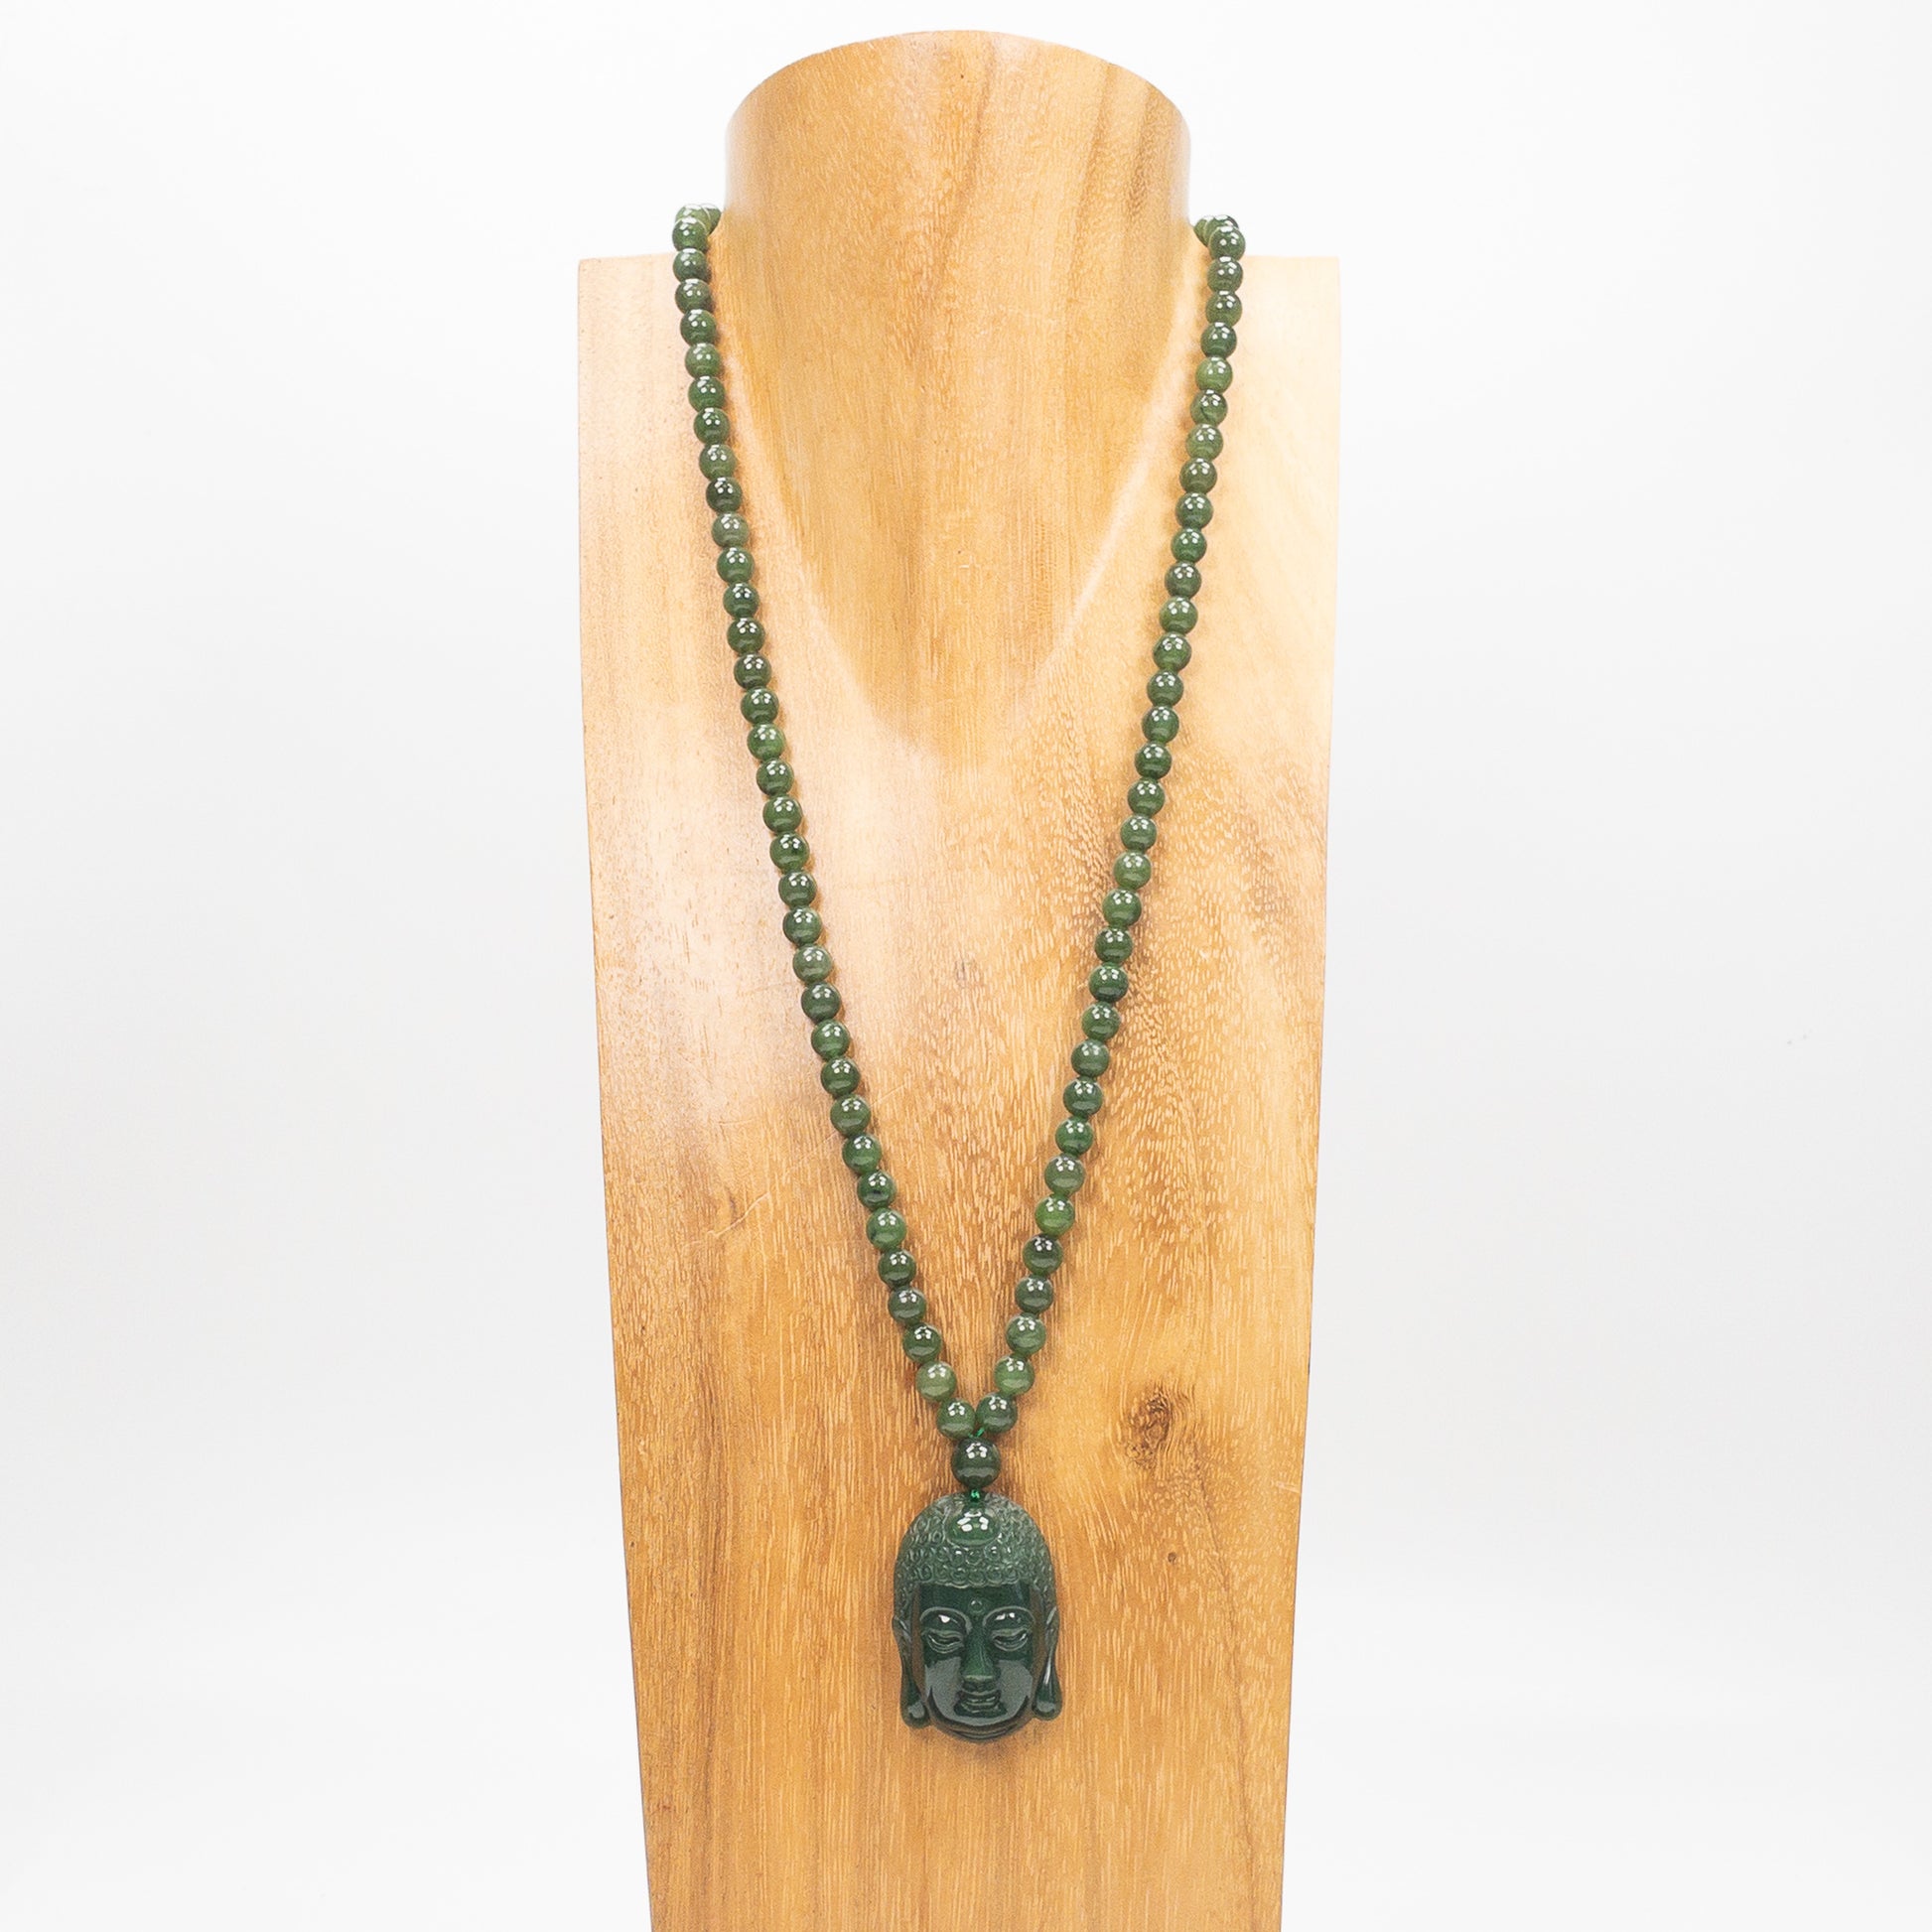 TRANQUILITY: Canadian Jade 8mm Round Bead Claspless Necklace with Buddha Pendant